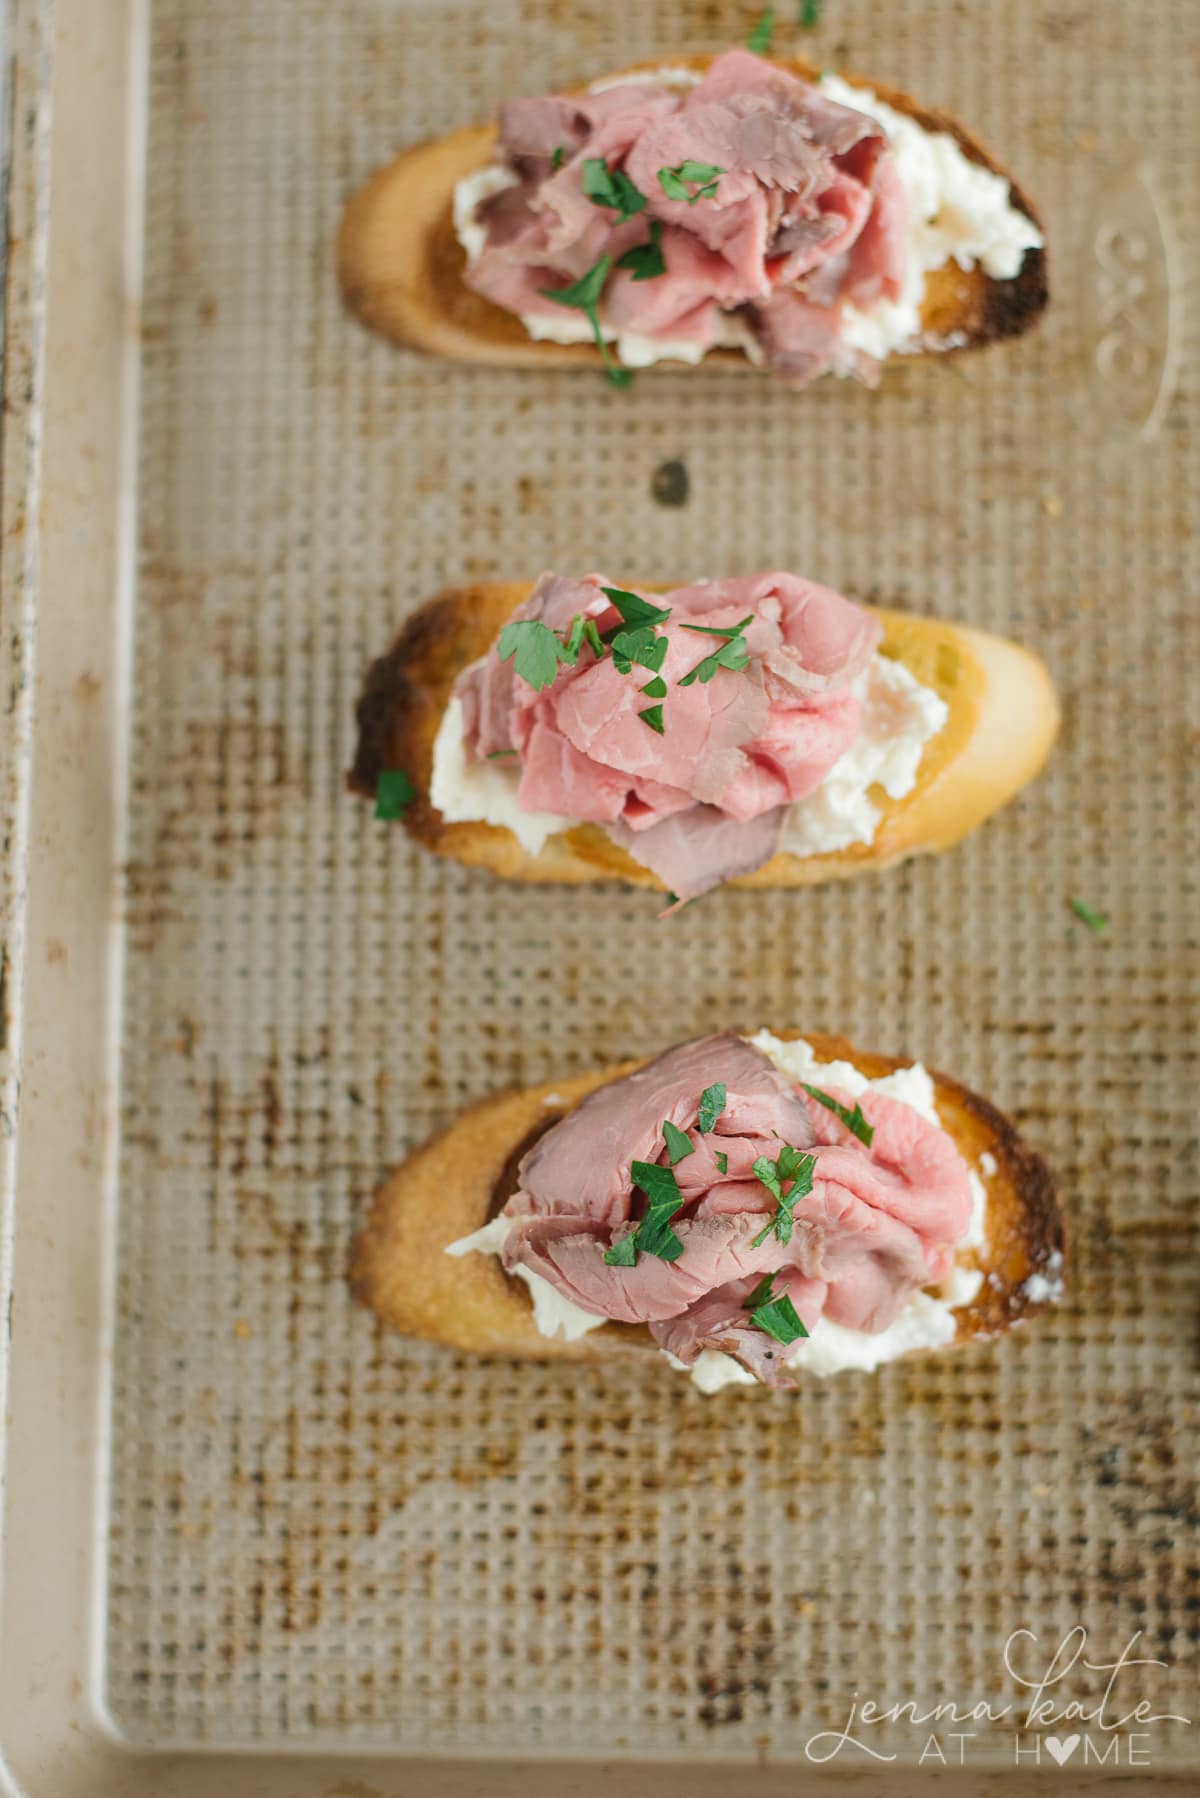 Easy holiday appetizer made with roast beef, cream cheese, horseradish and baguettes